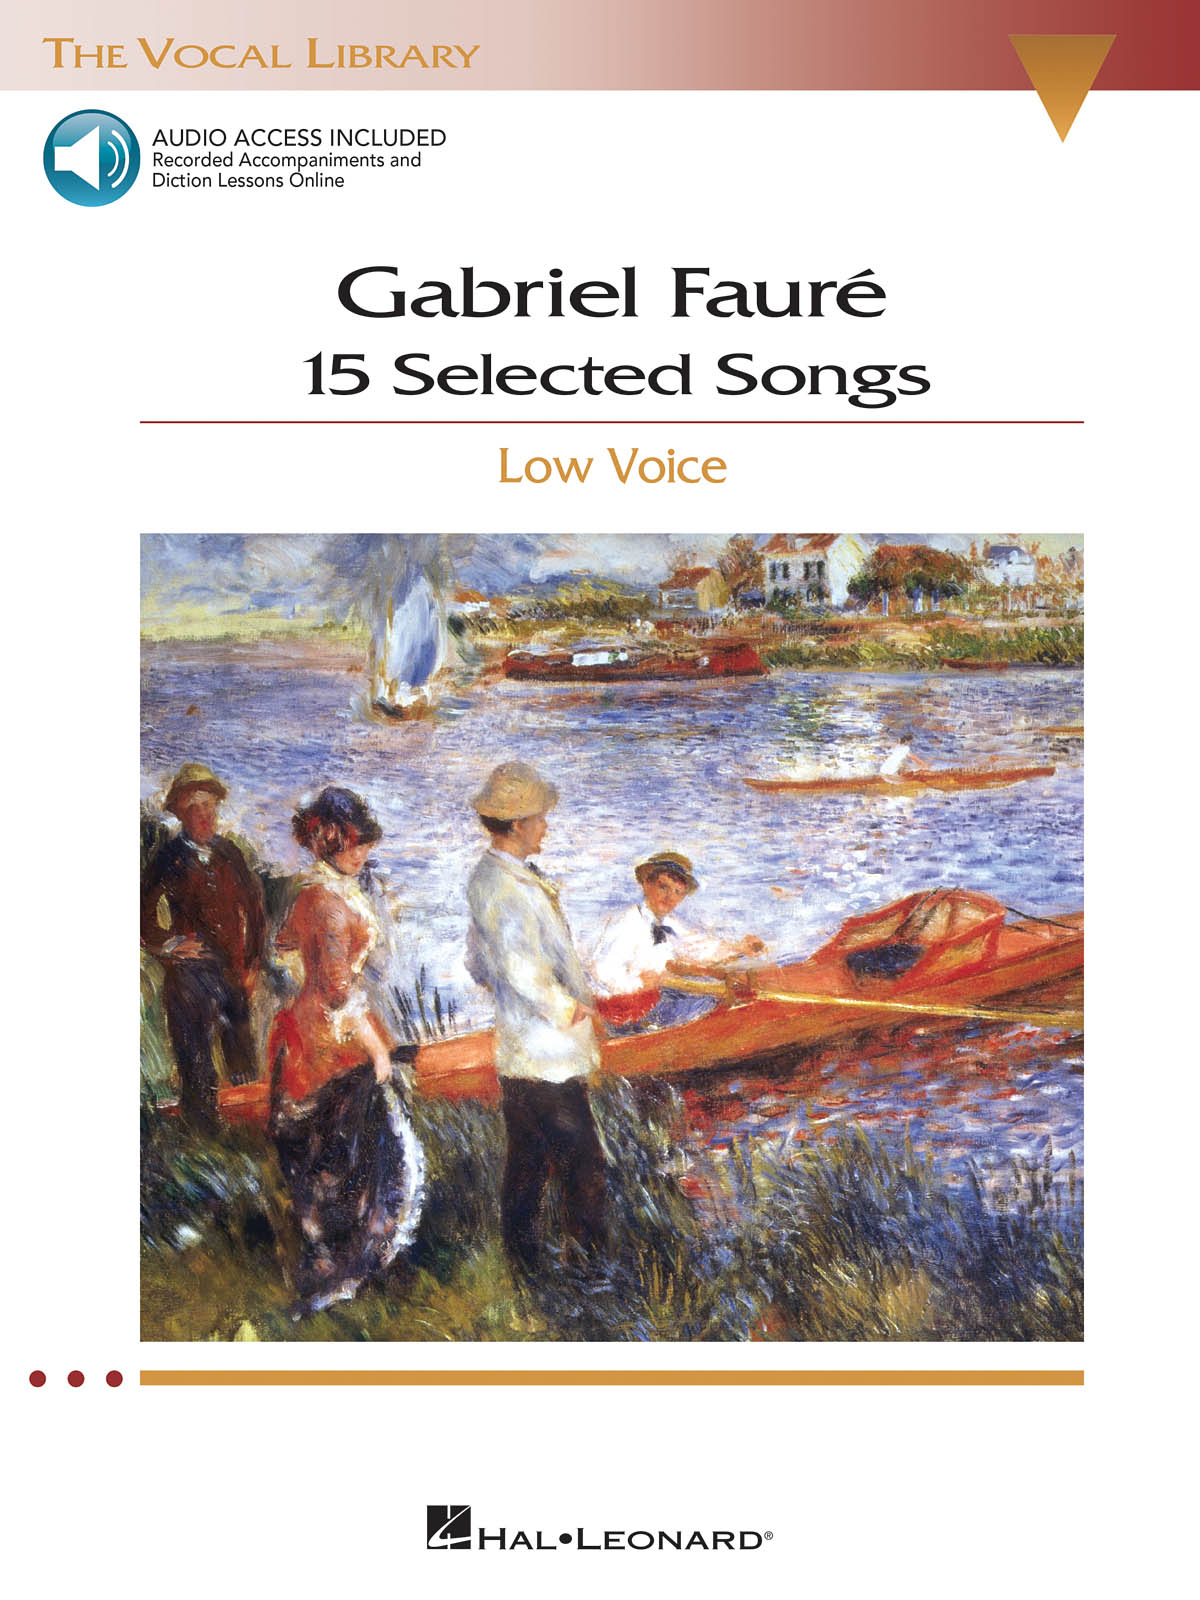 Gabriel Fauré: 15 Selected Songs - Low Voice: Vocal and Piano: Vocal Album